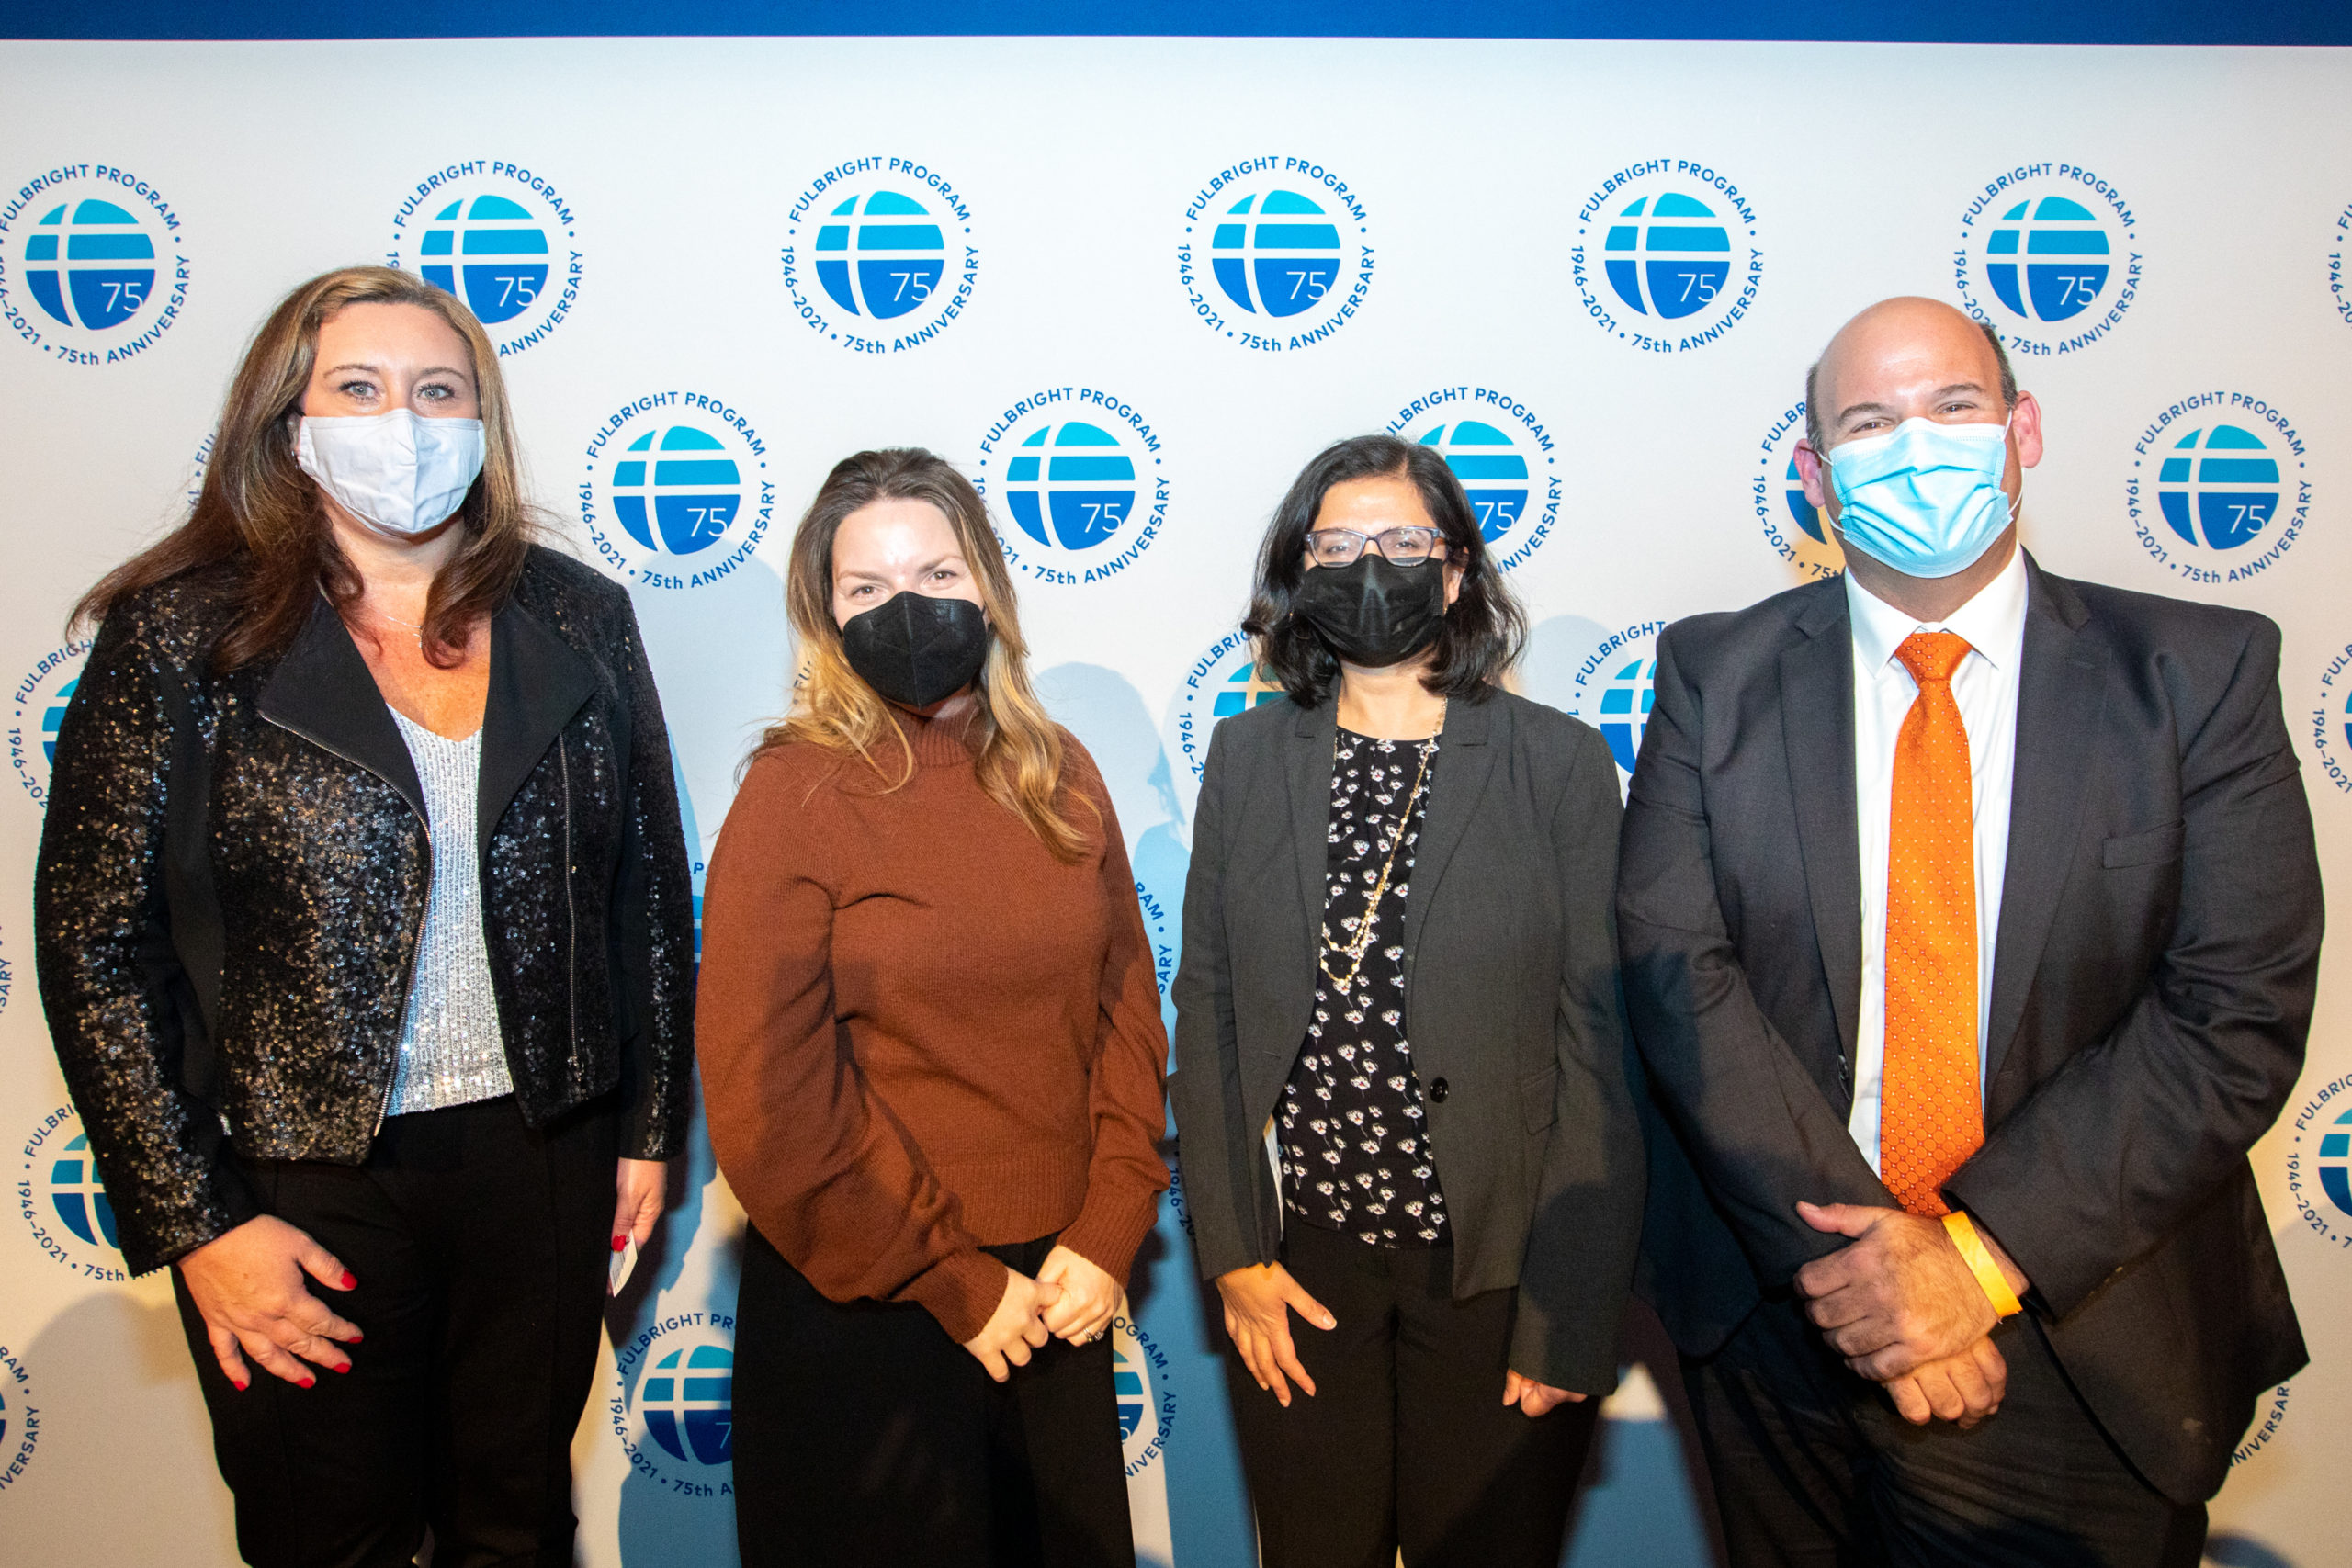 Group of people standing in front of a backdrop of the Fulbright logo. All are wearing business attire and wearing masks.